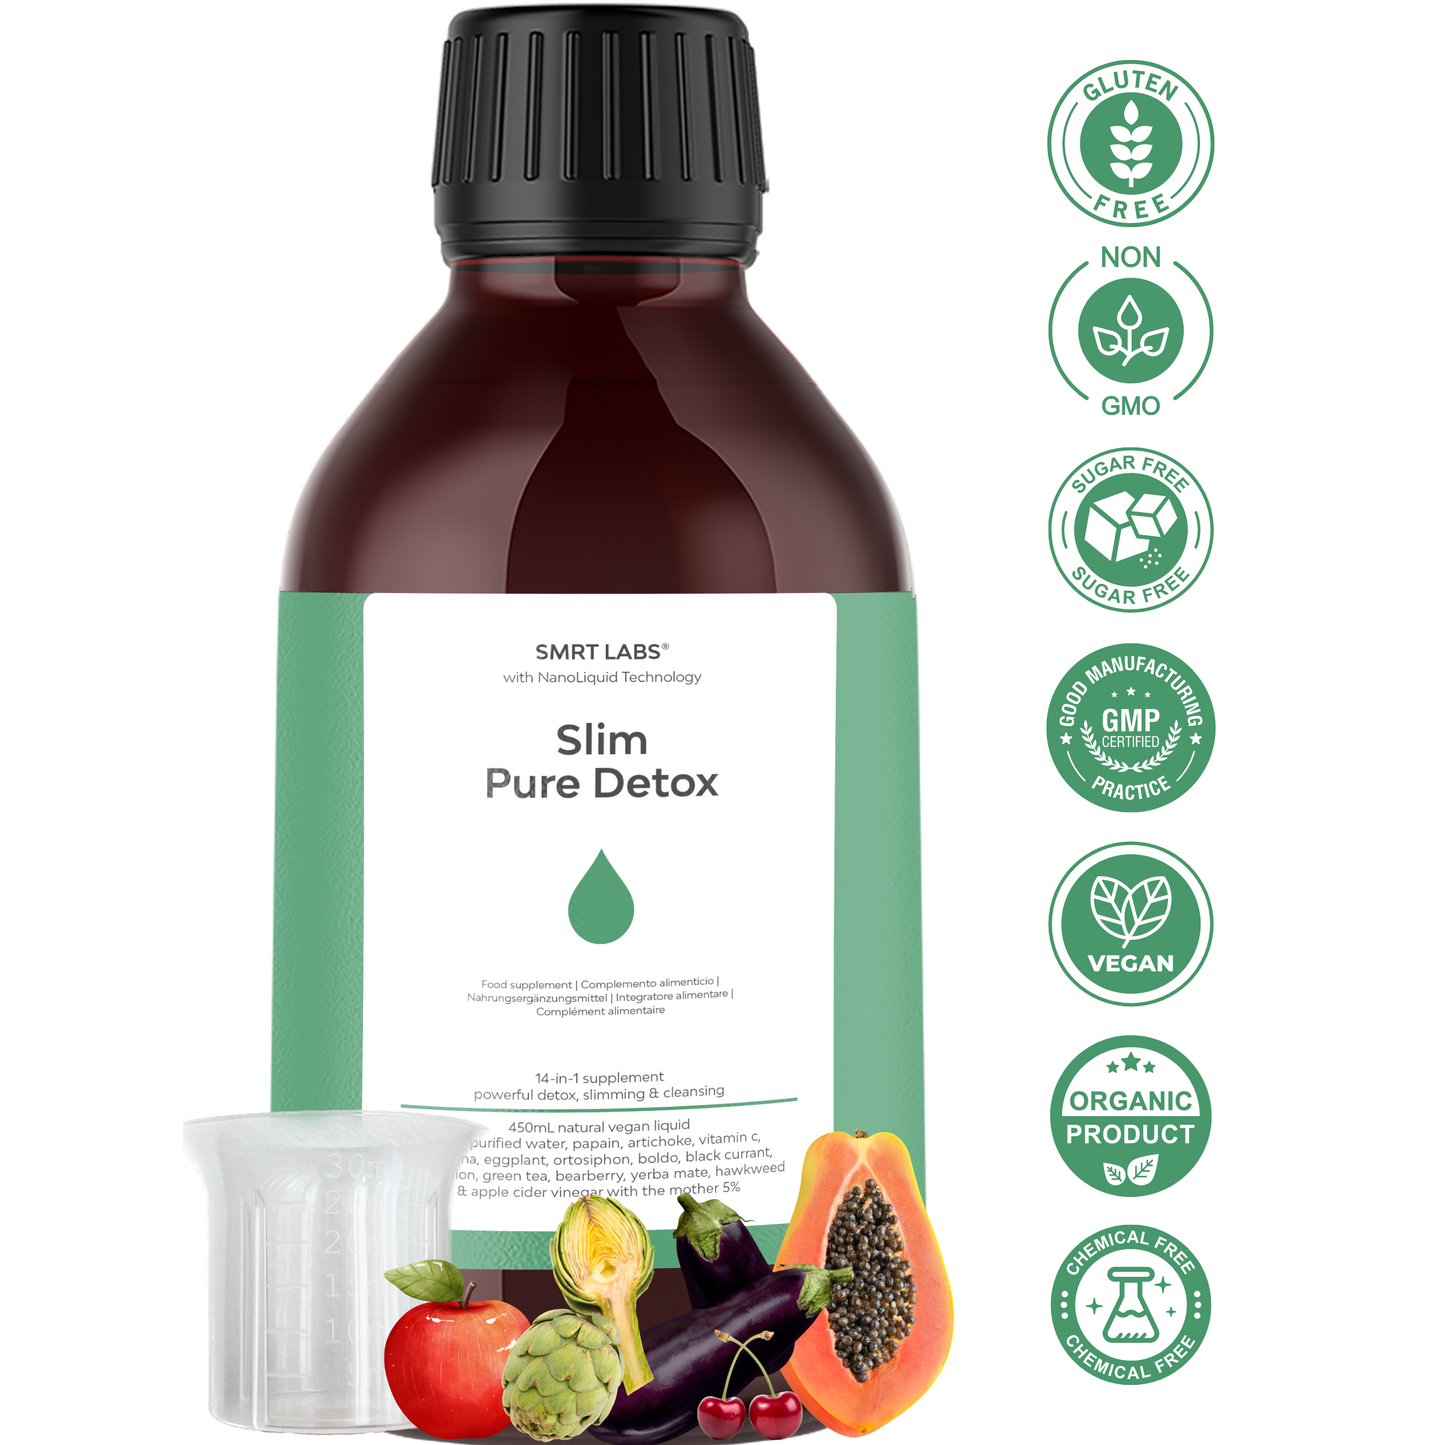 45-Day Slim Pure Detox® 14-in-1 | Powerful Natural Detox, Slimming & Cleanse (coming soon)